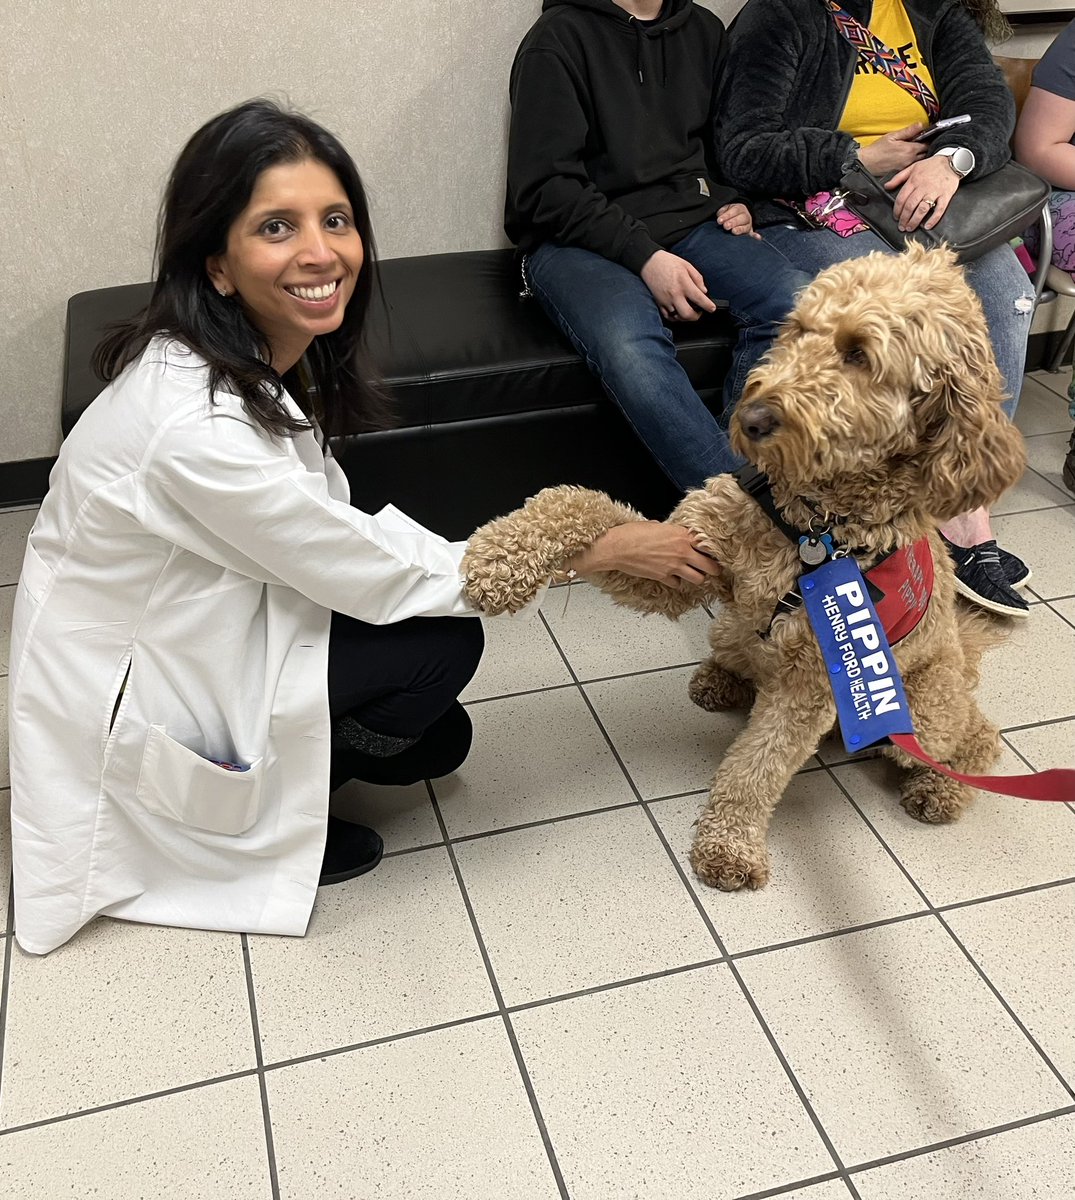 Inpatient rounds with a quick therapy break. Say hi to Pippin! 👋 🐶 @HFEndocrineFell @HenryFordHealth